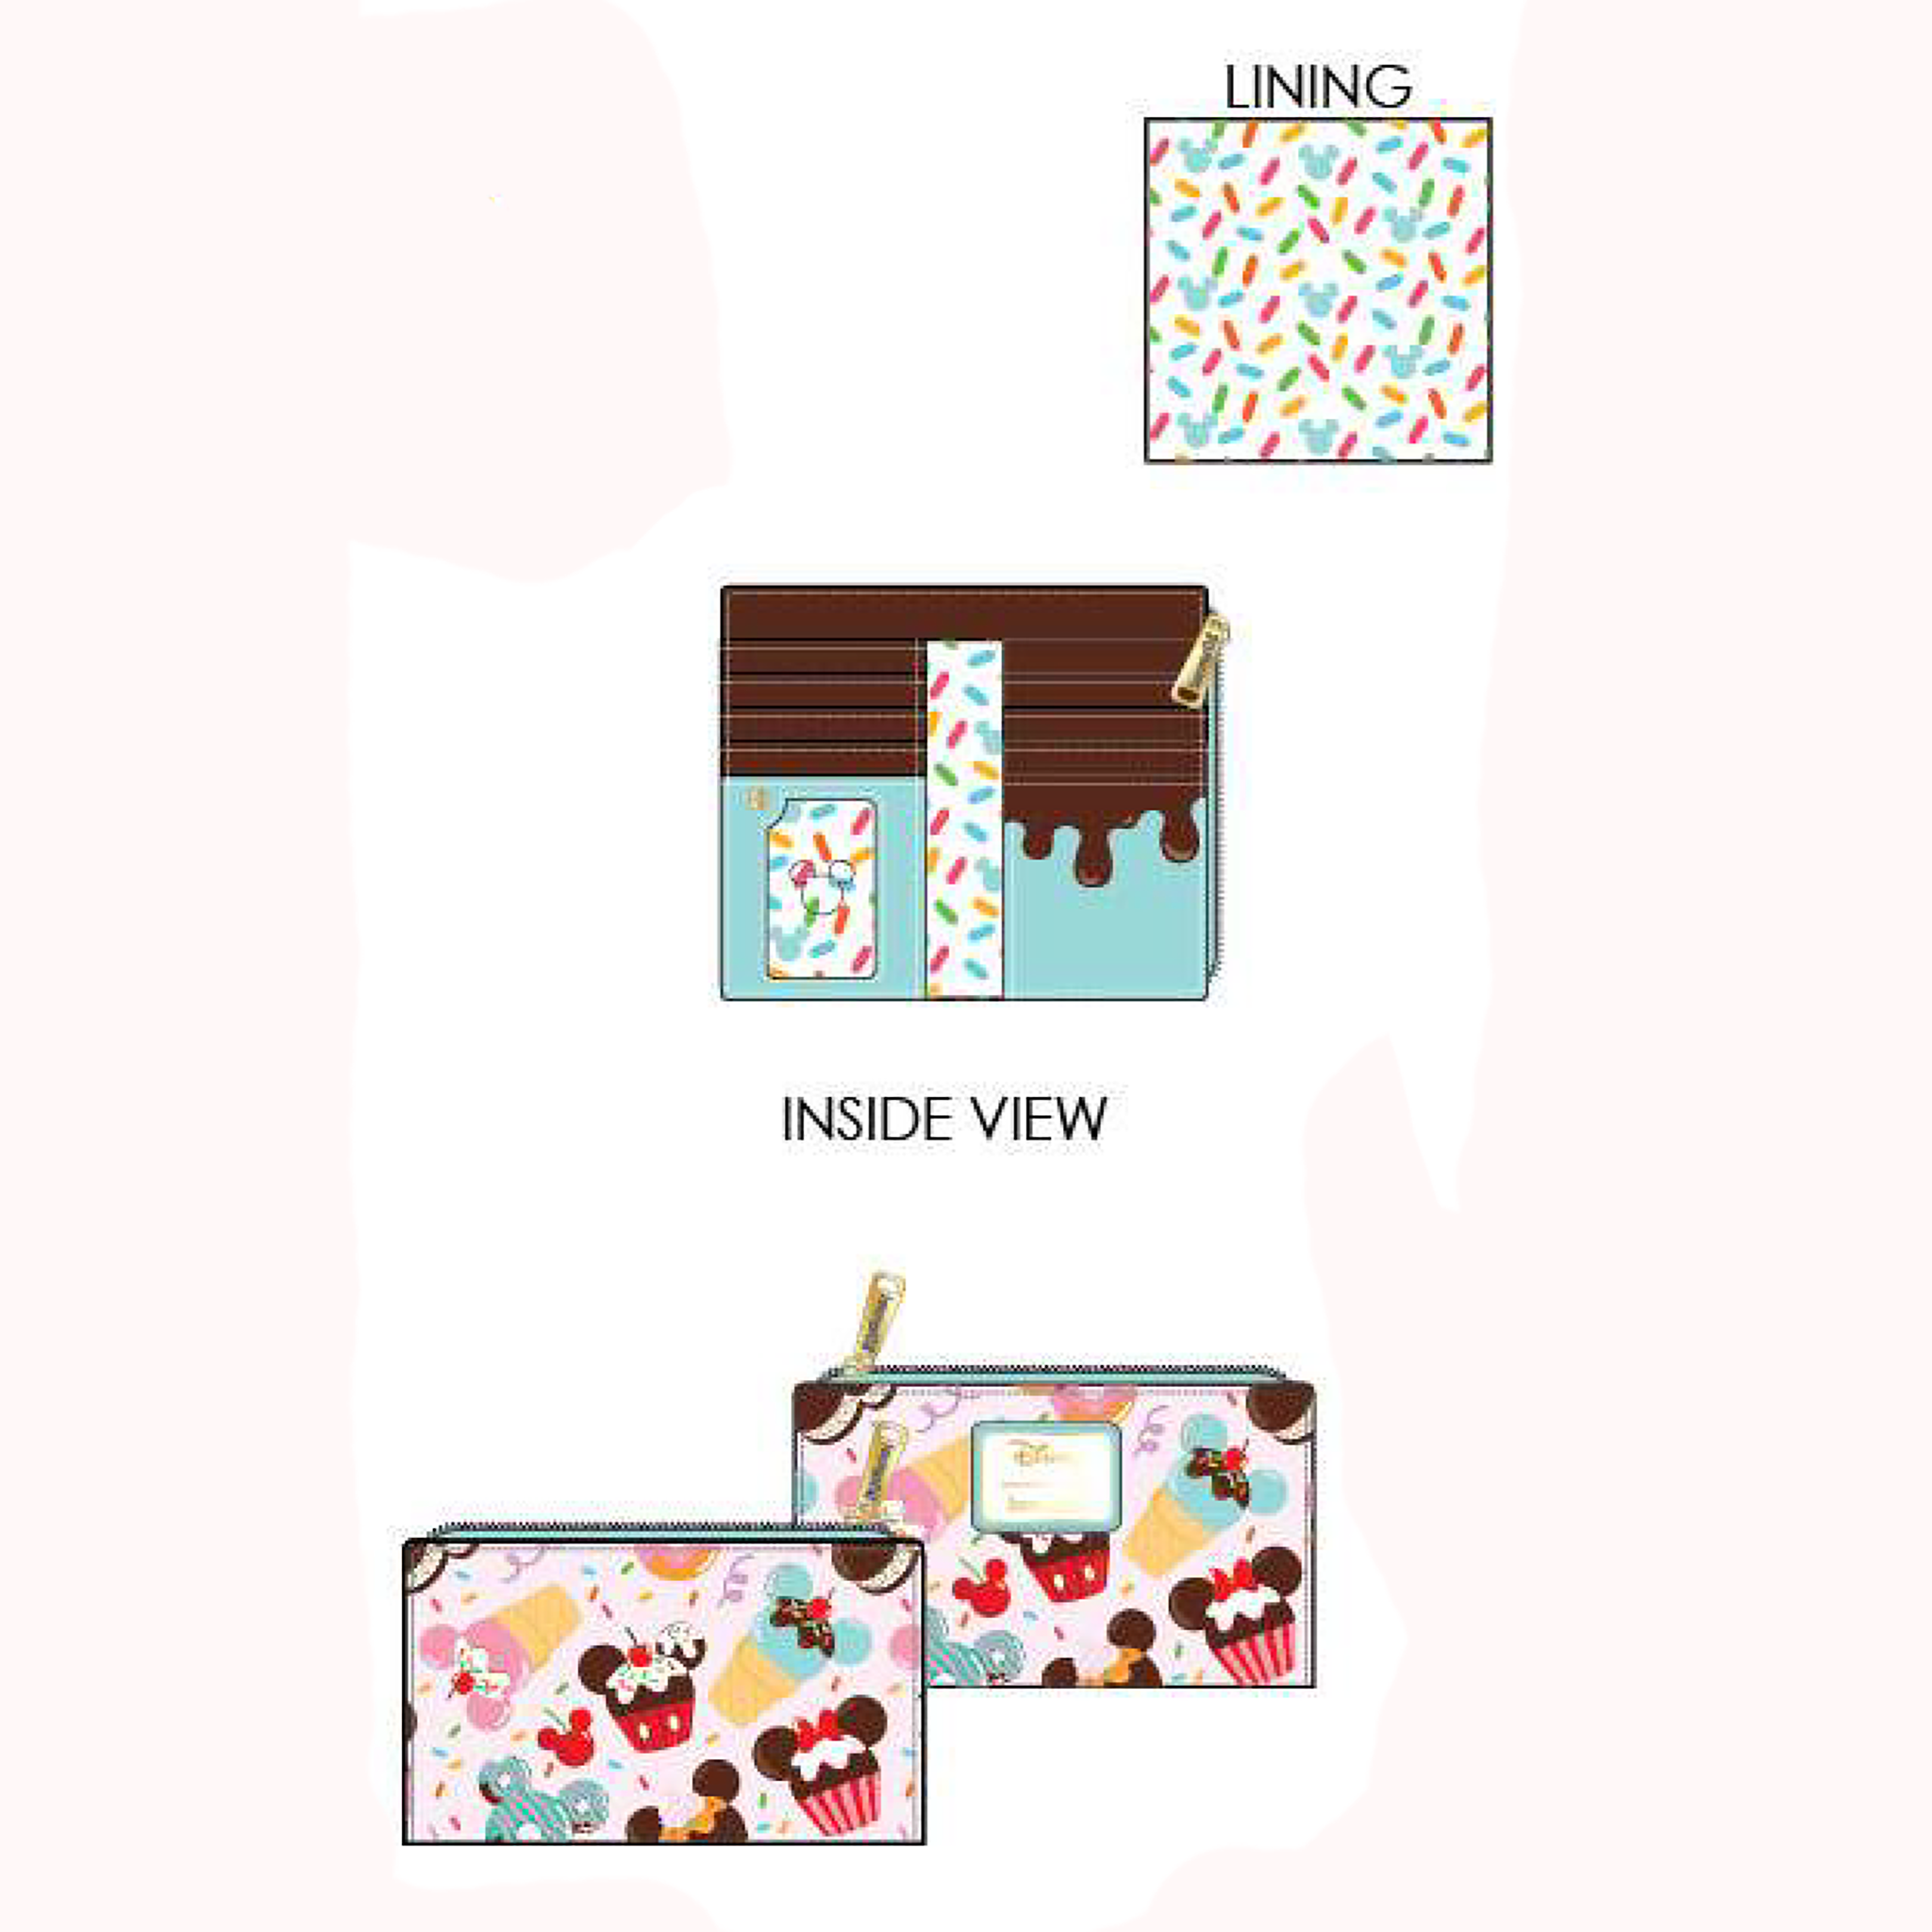 Loungefly Mickey and Minnie Mouse Sweets Flap Wallet